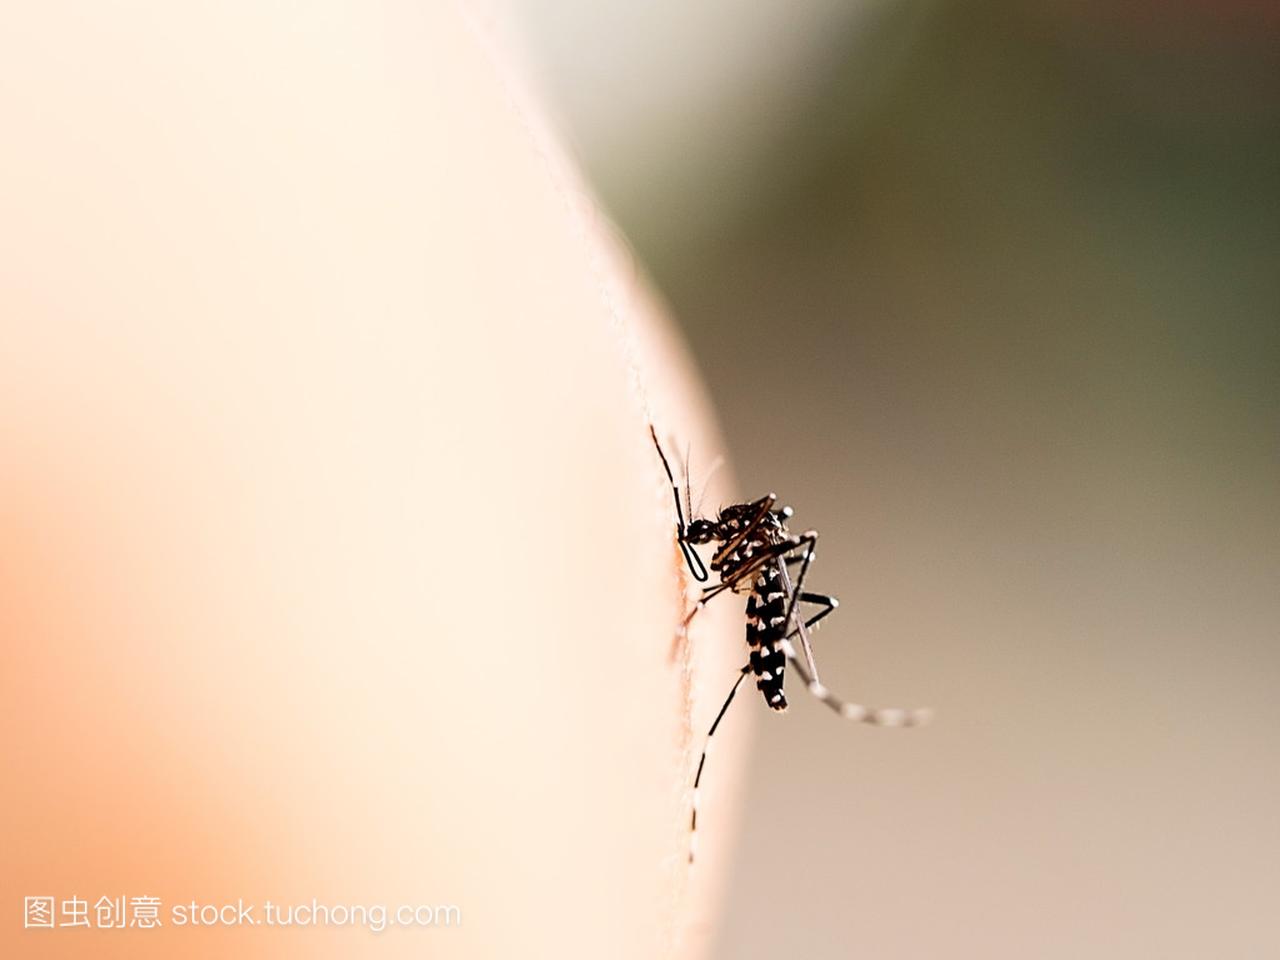 Mosquito bite on human skin (selective focus)